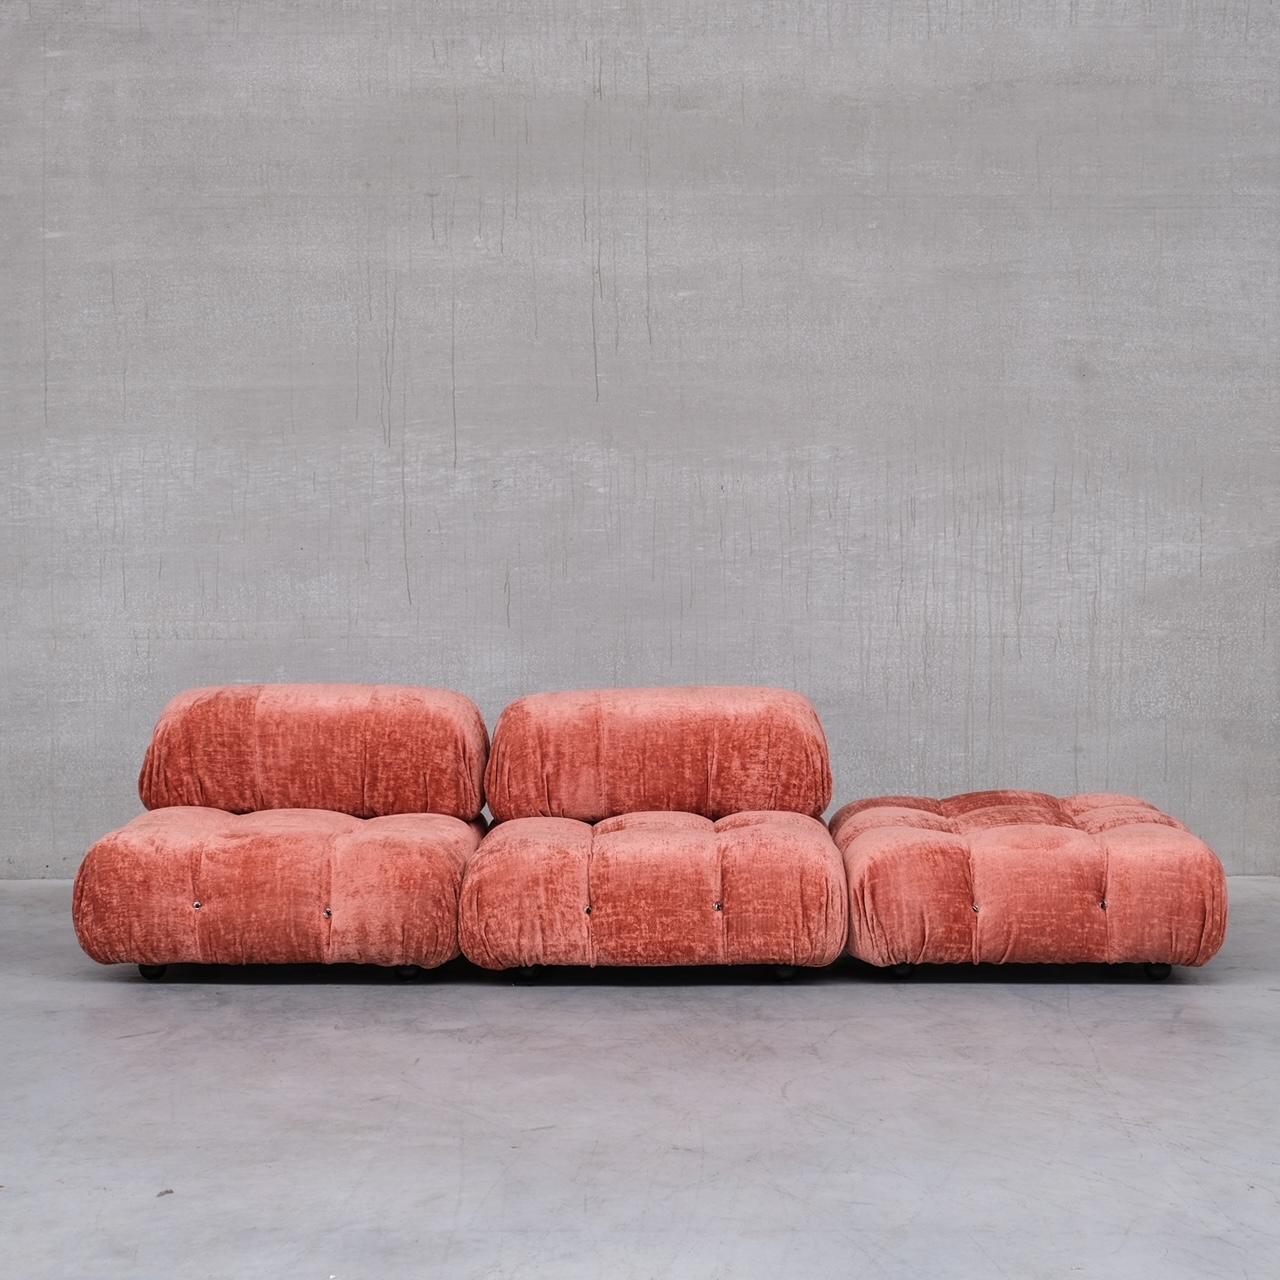 A modular sofa by Mario Bellini for C&B Italia. 

Italy, c1970s. 

Two pieces with a back rest, one pouf or flexible module. 

The modules can be re-arranged in different arrangements. 

Good condition to the upholstery. Ready to go.